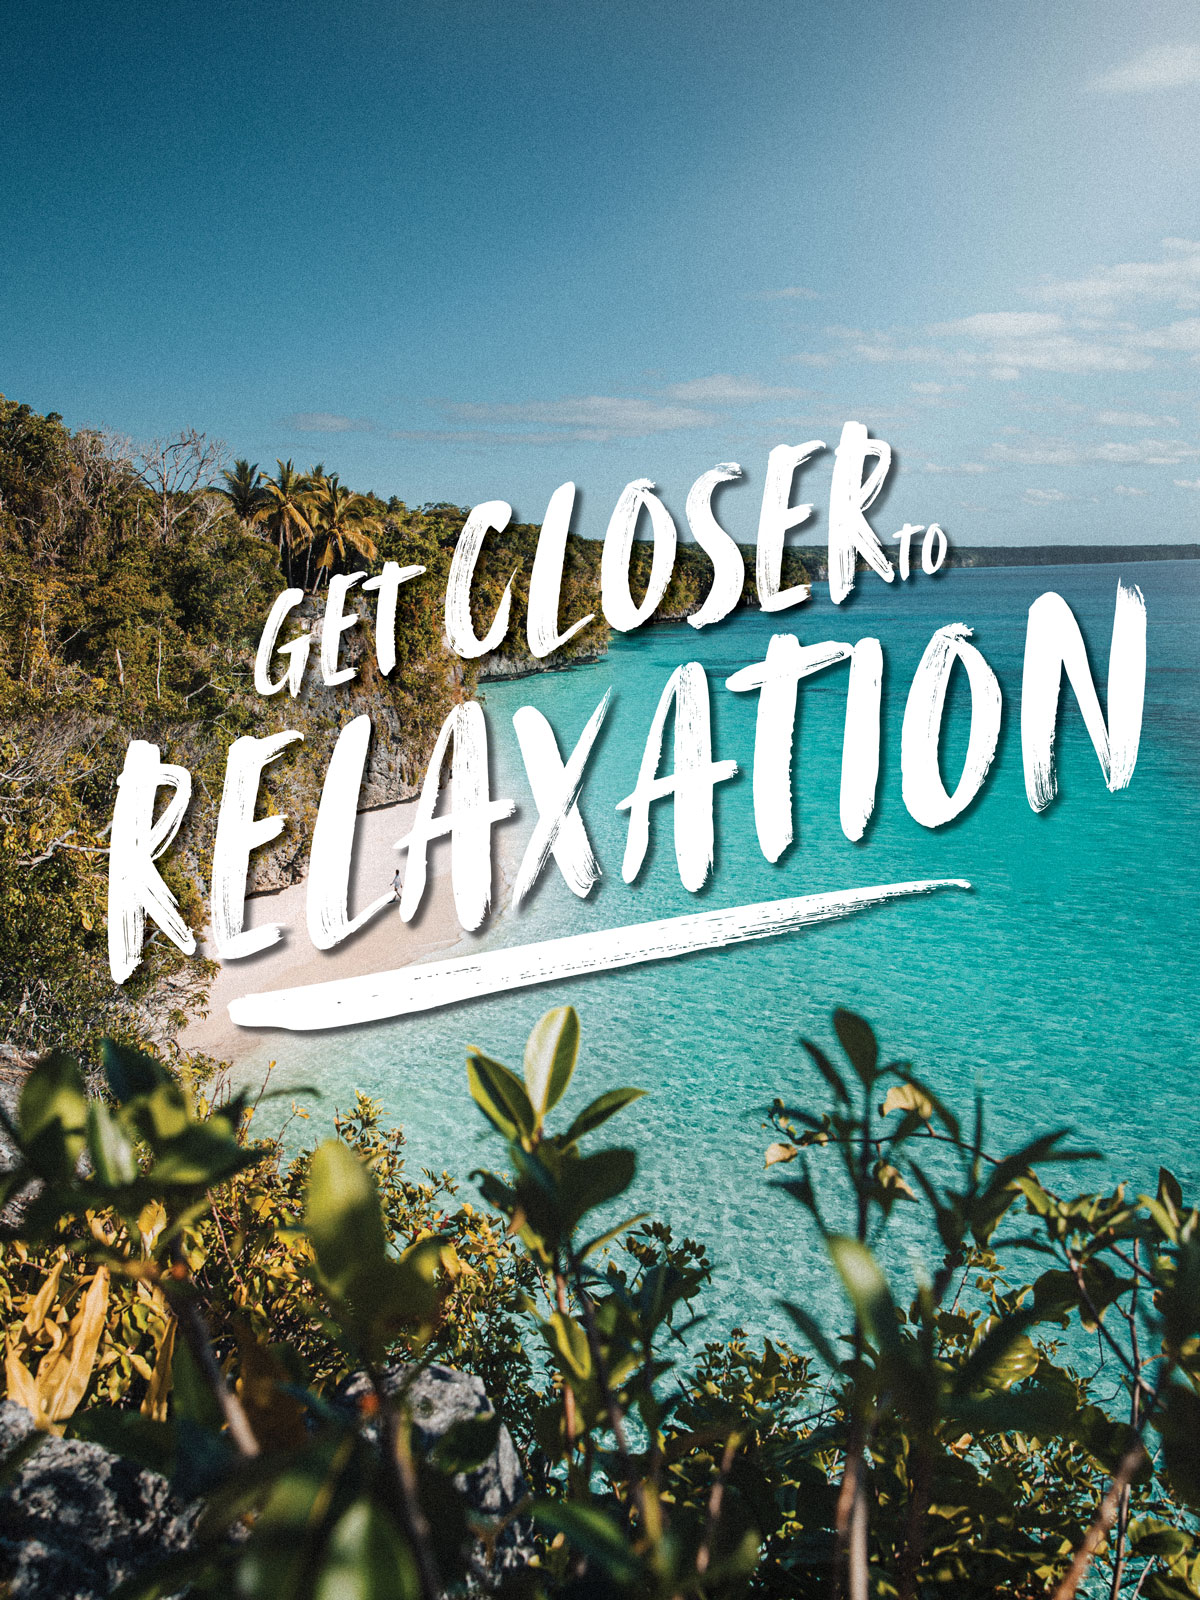 Get closer relaxation